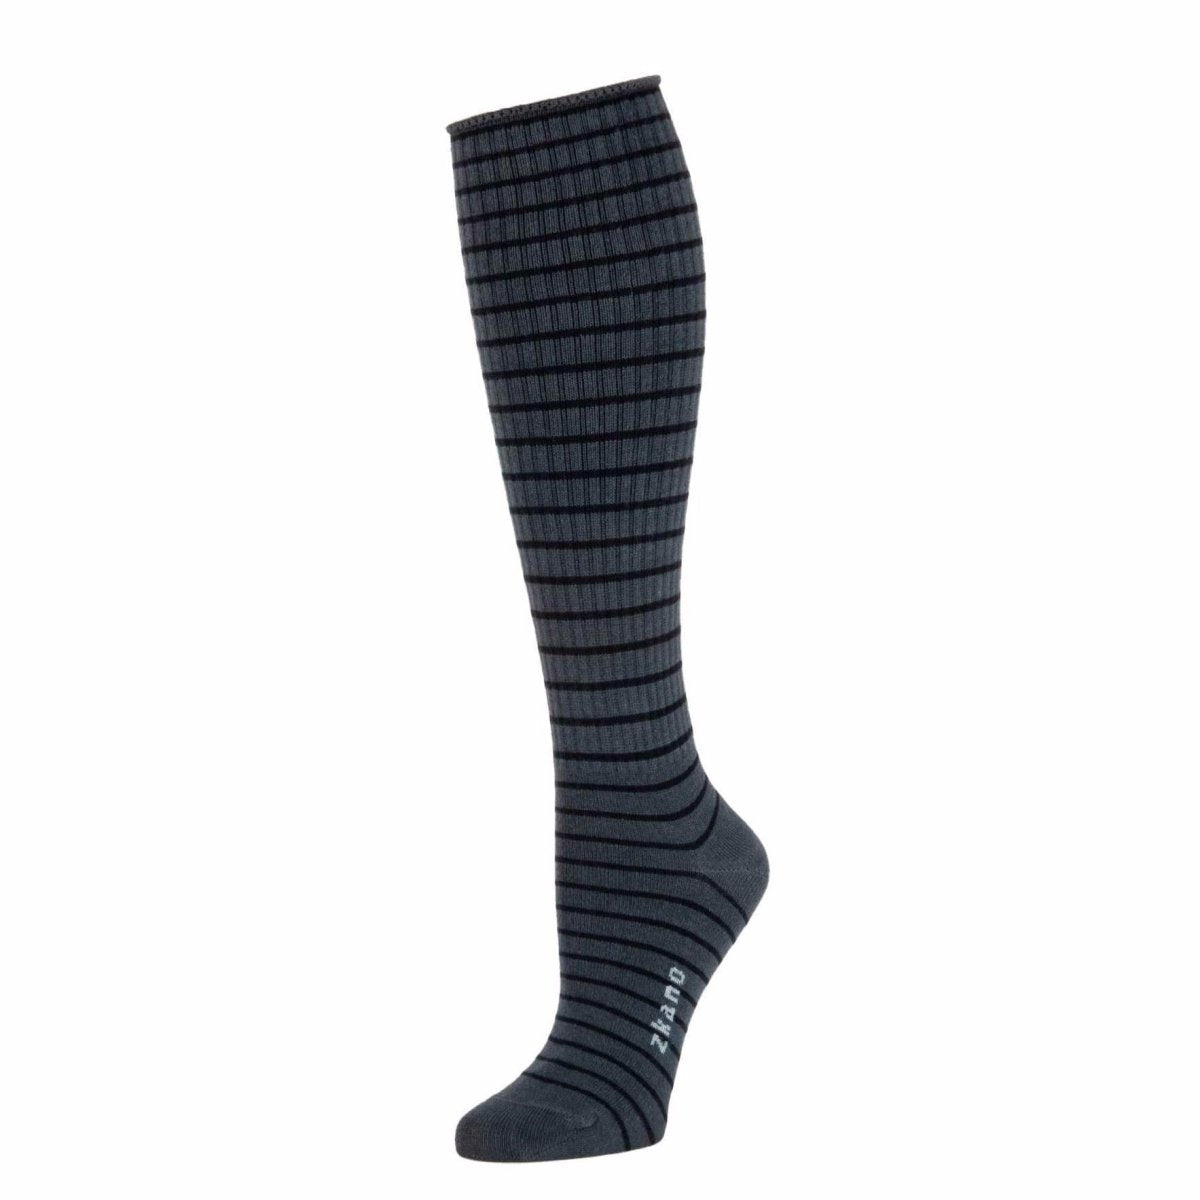 Dark grey ribbed knee sock with black striped pattern. The Rose Striped Knee Sock in Ash is from Zkano and made in Alabama, USA.